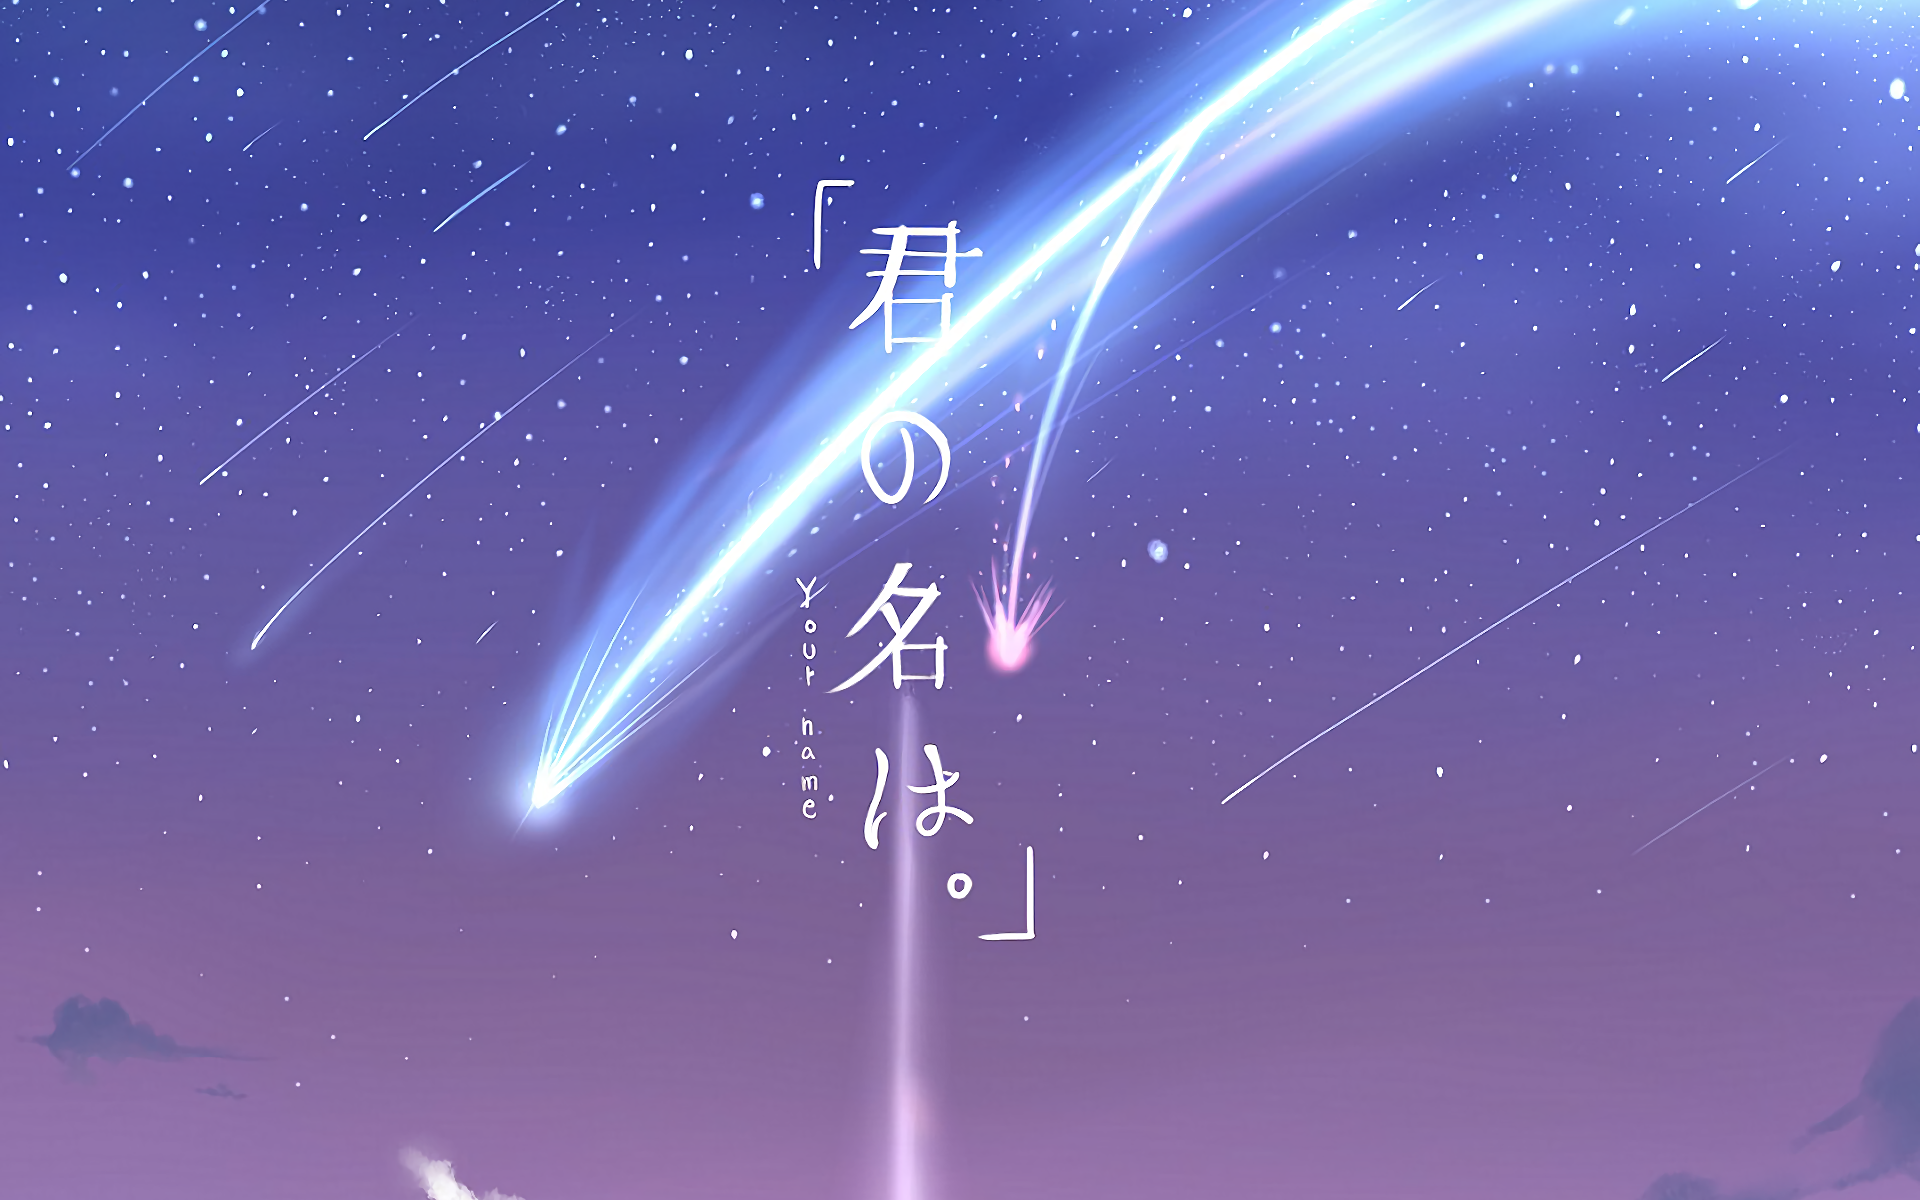 Your Name Wallpaper 19x10